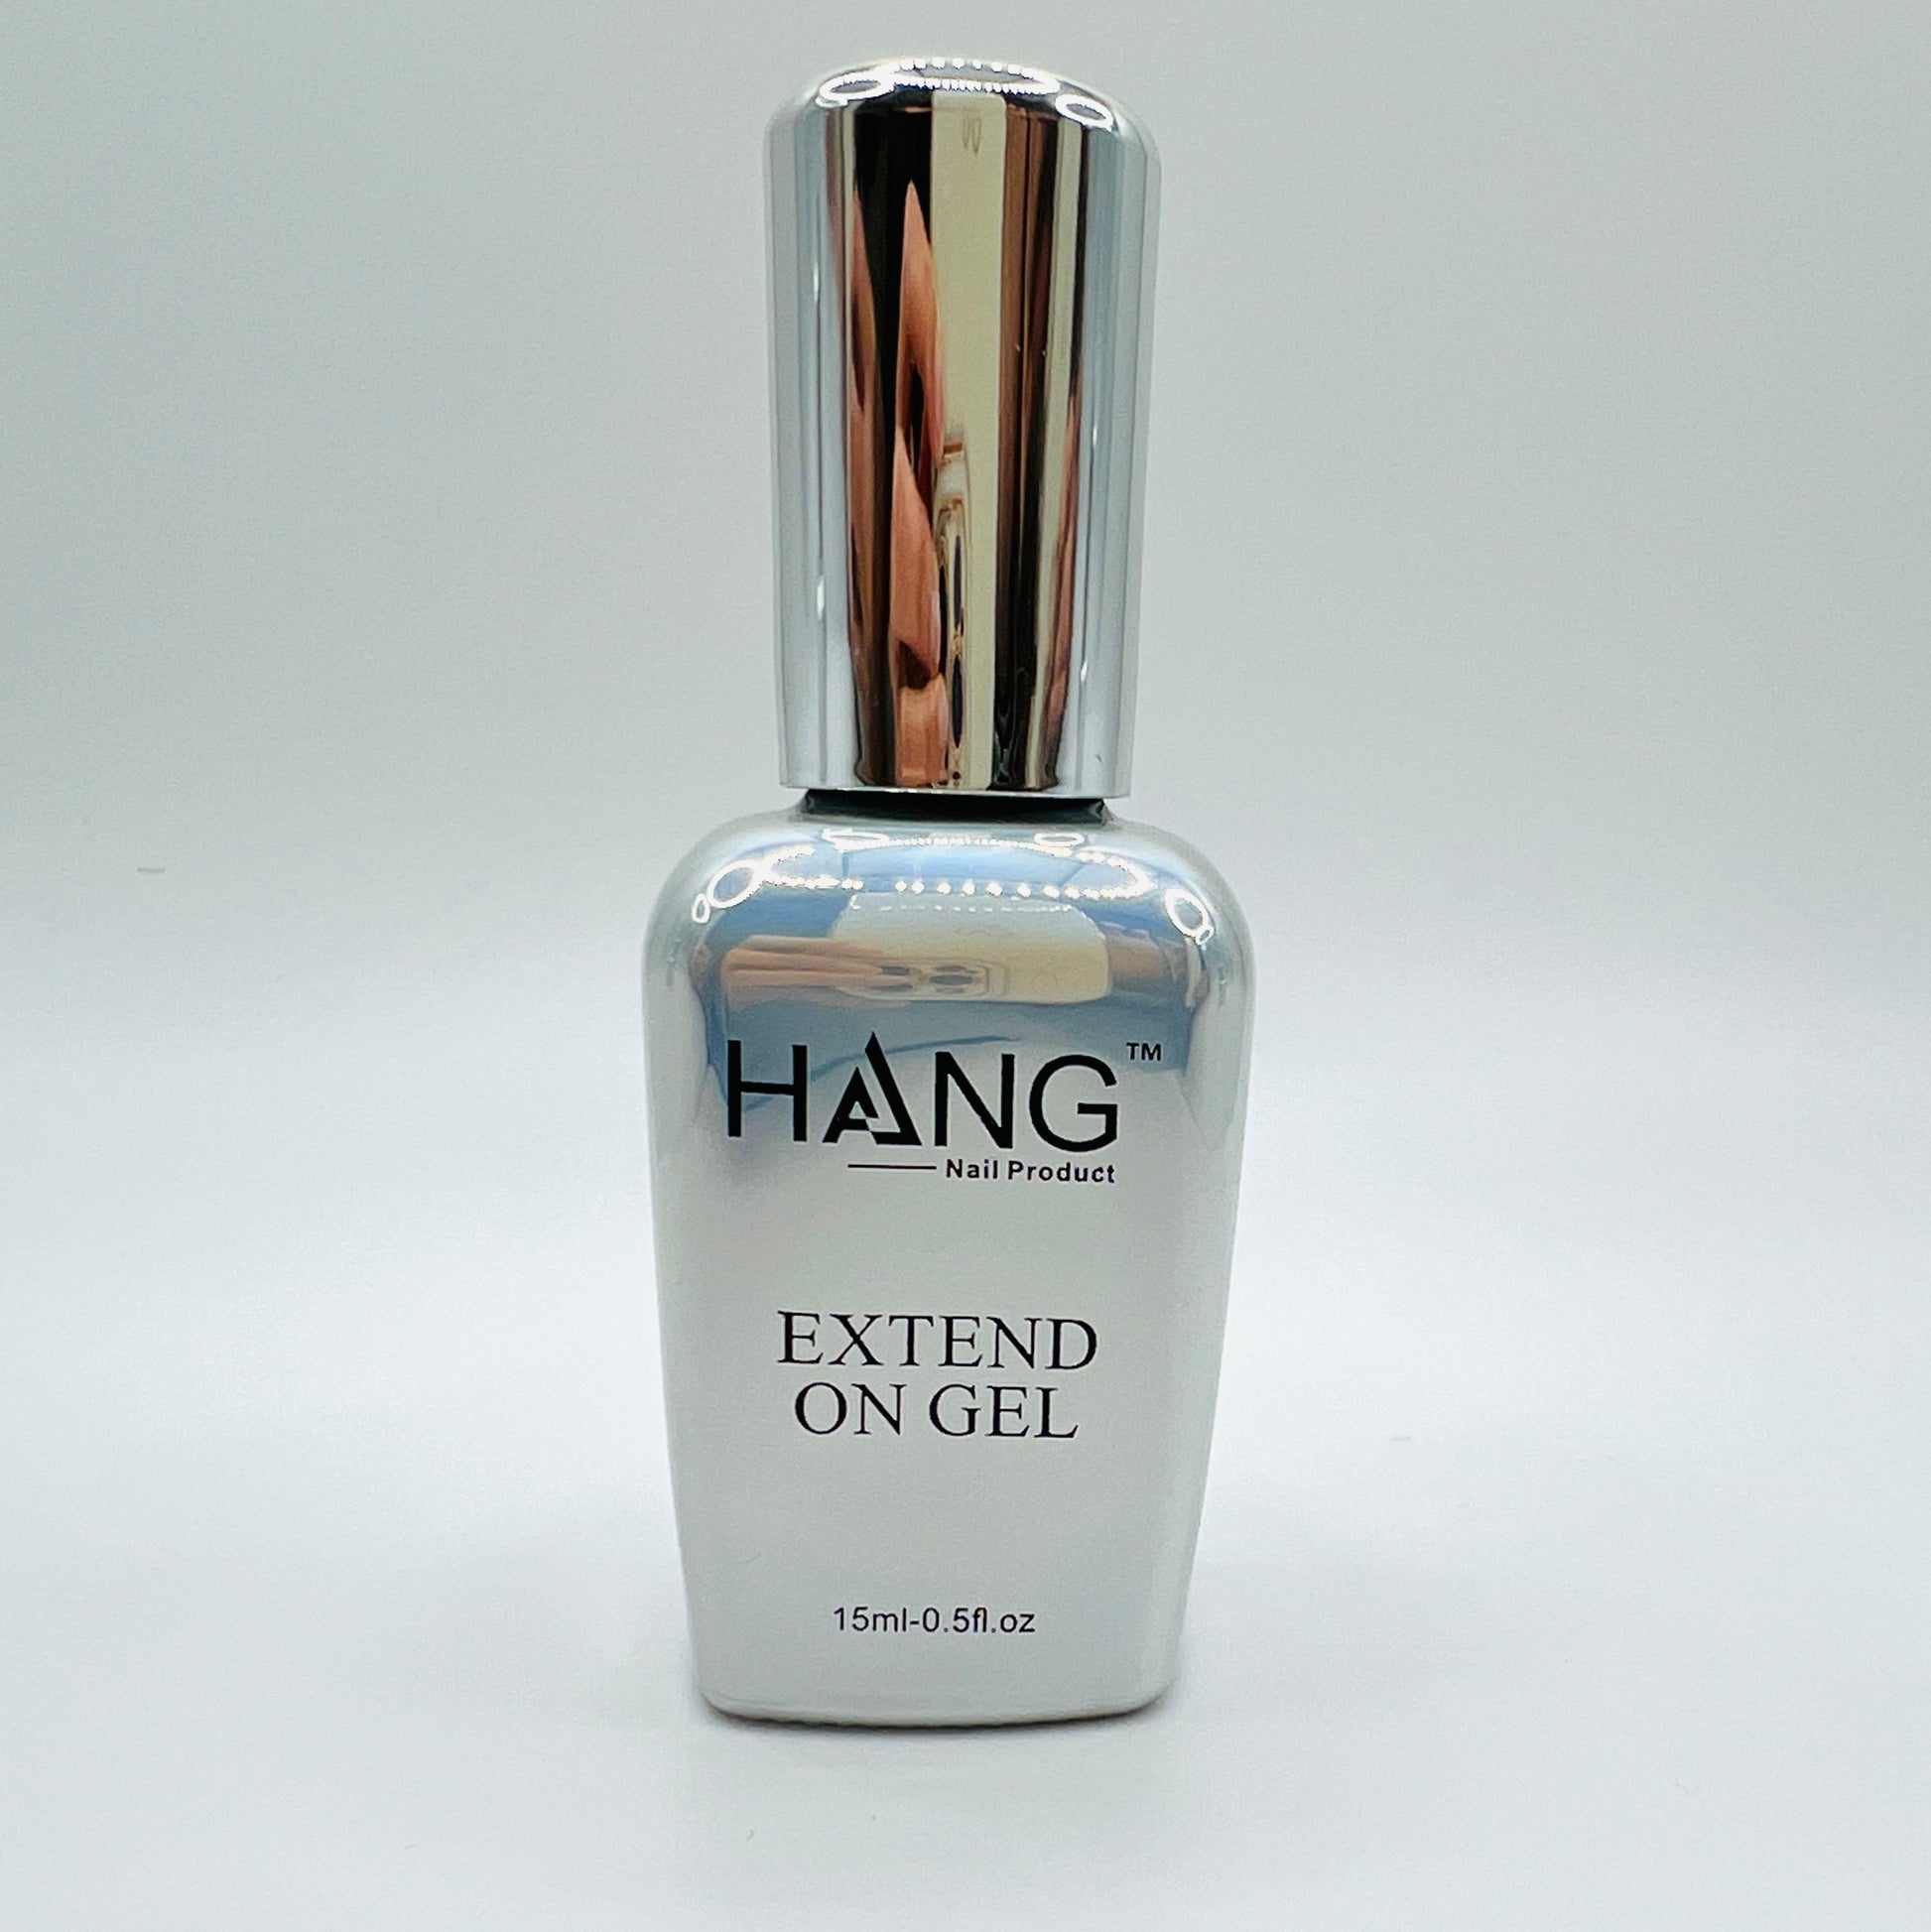 Extend Gel Glue 15ml /0.5Oz Bottle  Brand: Hang  Color: Clear  Apply as glue for Gel X nails